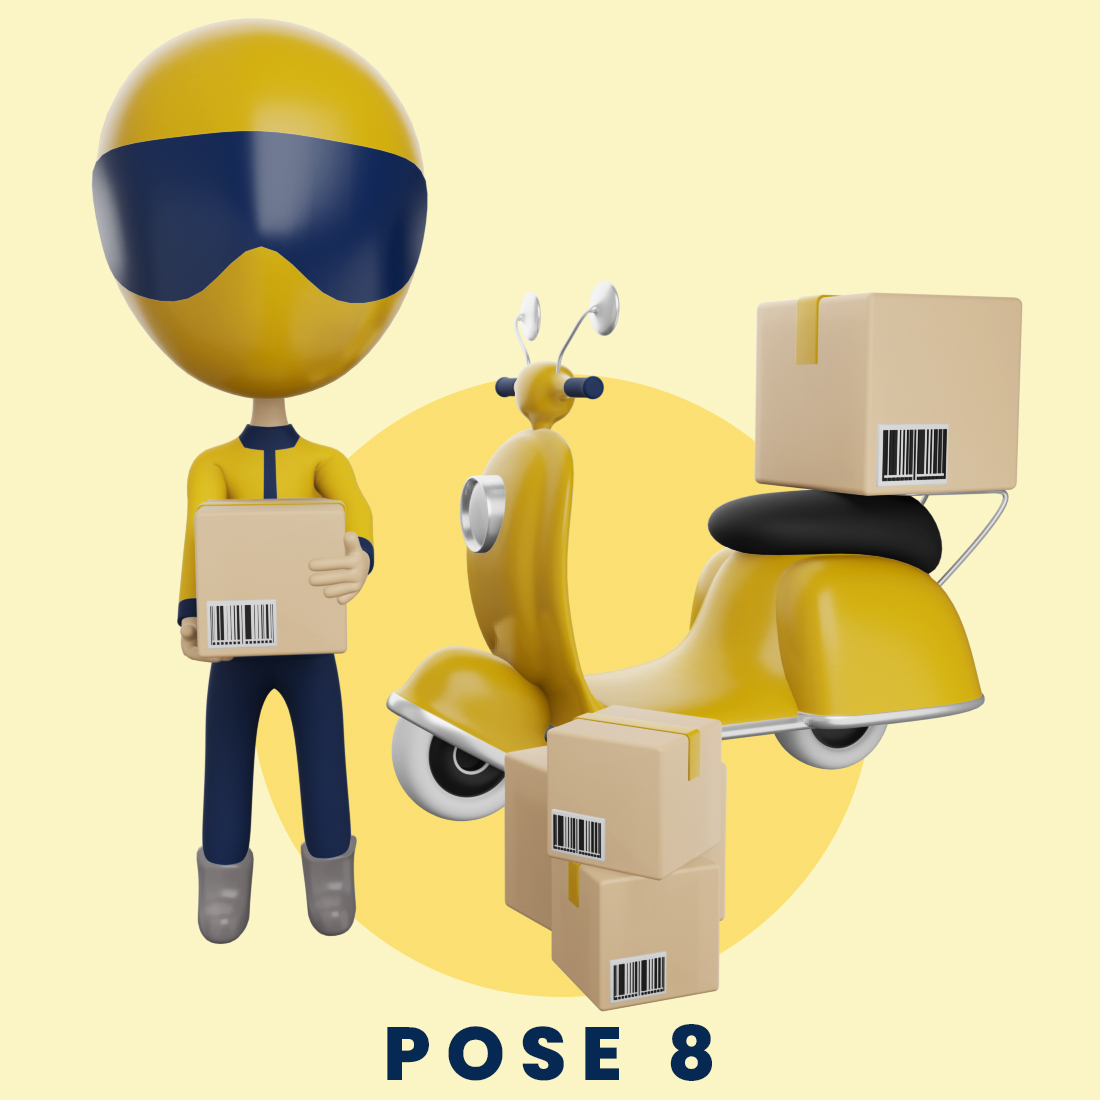 3D illustration with 10 poses of 3D characters wearing helmets with scooters and also carrying packages.